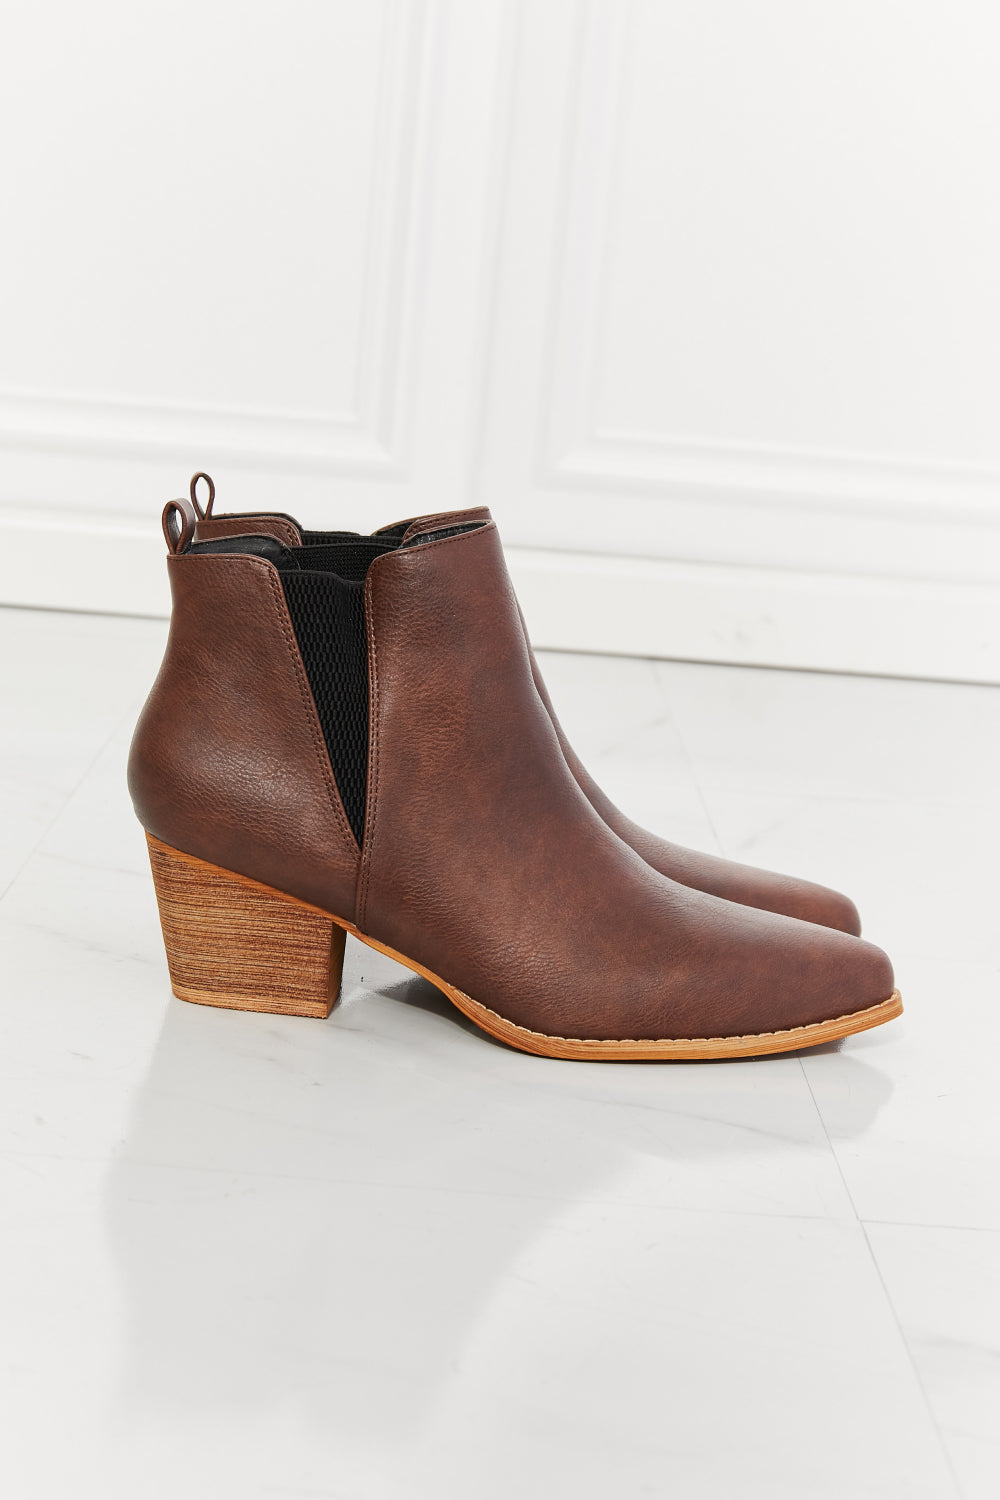 MMShoes Back At It Point Toe Bootie in Chocolate - AllIn Computer